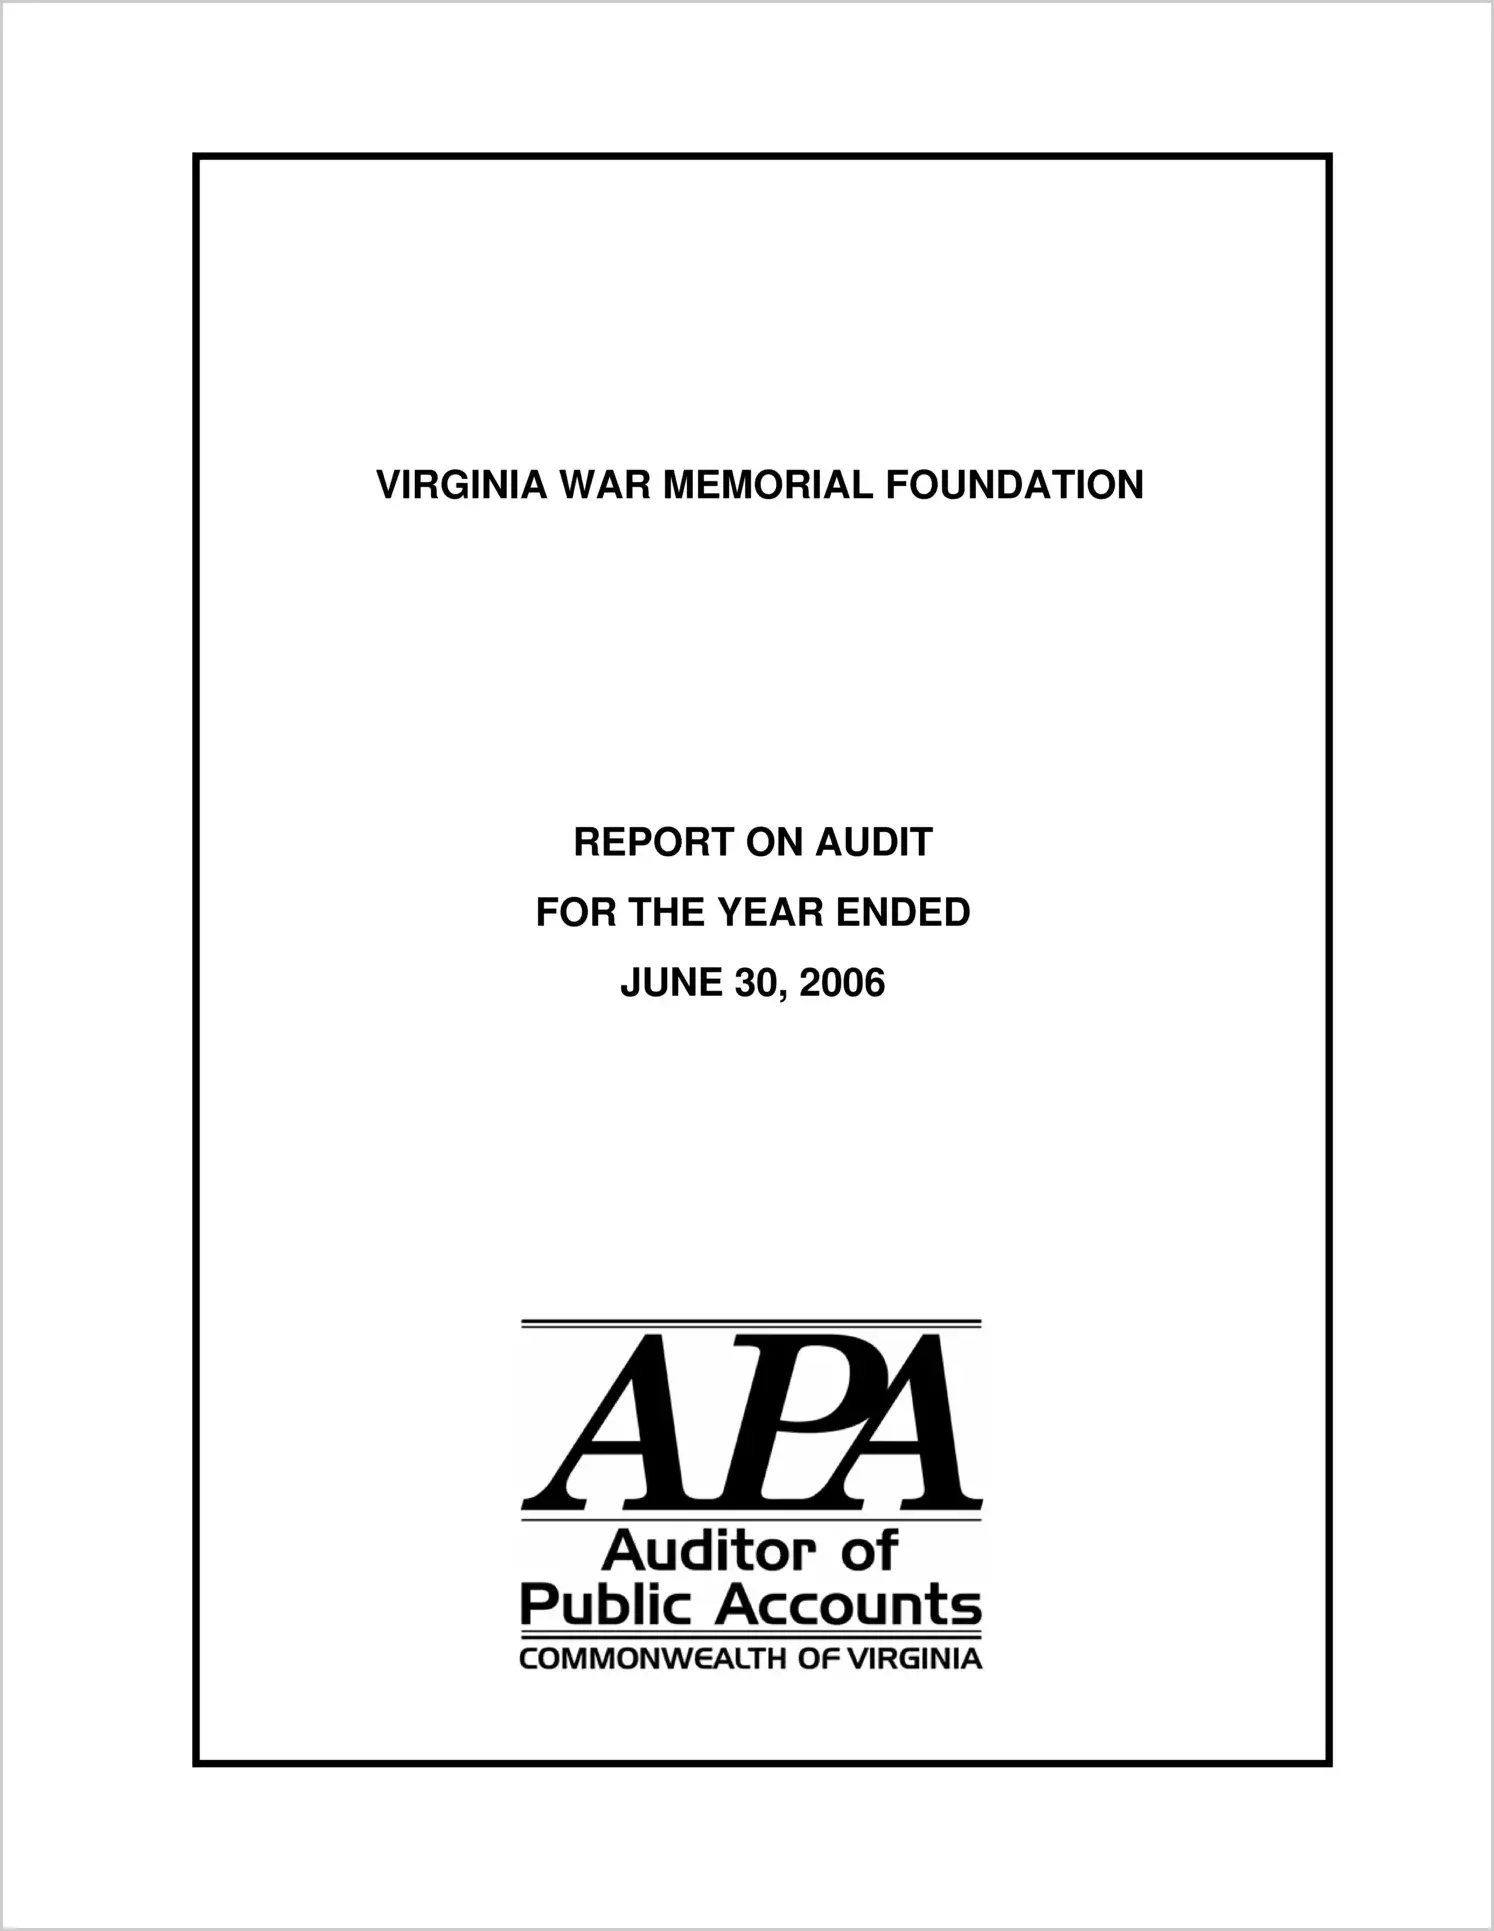 Virginia War Memorial Foundation for the year ended June 30, 2006